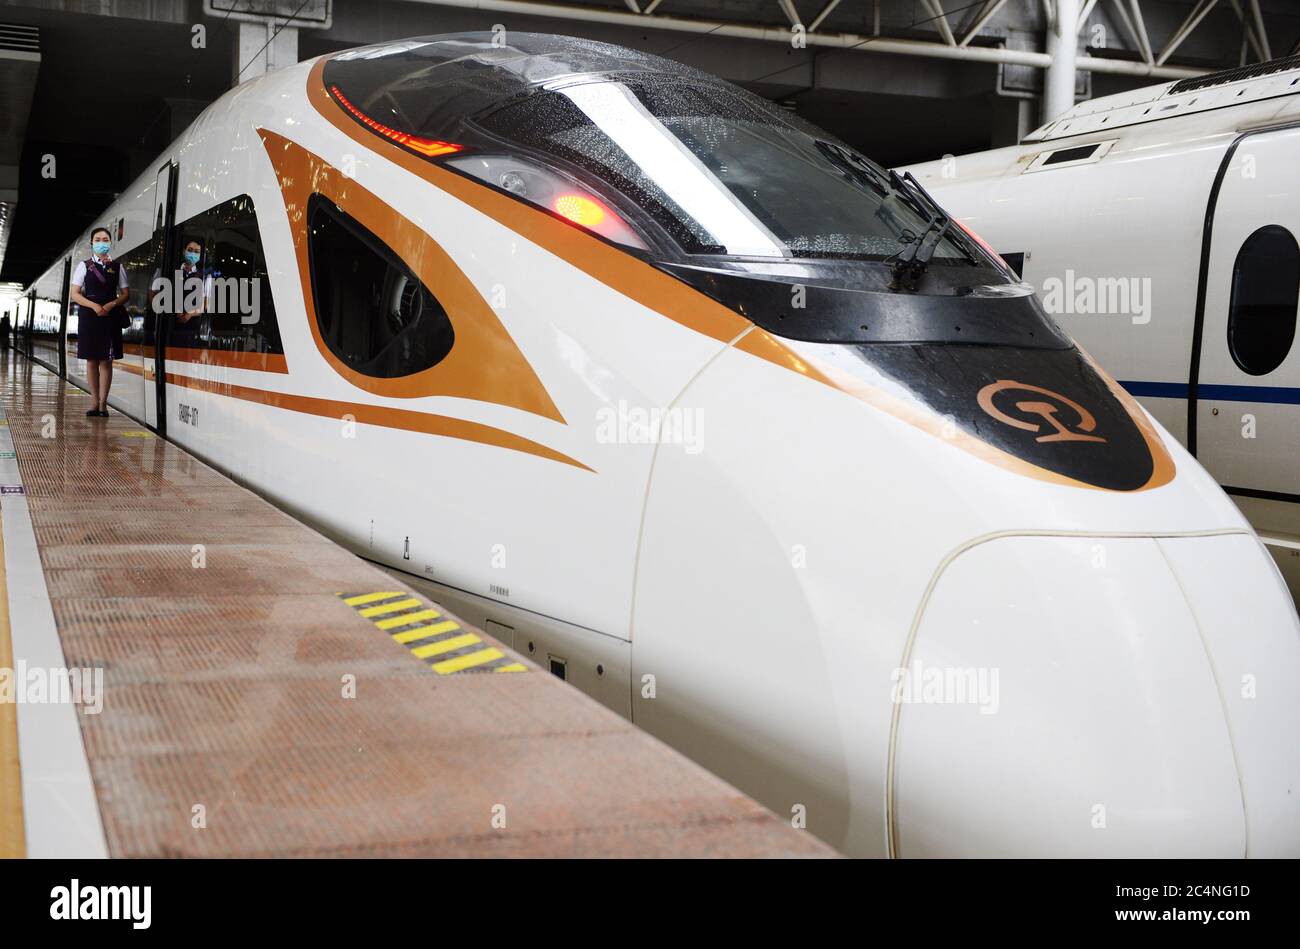 Hefei. 28th June, 2020. Photo taken on June 28, 2020 shows train No. G9394, which travels from Hefei to Hangzhou on the Shangqiu-Hefei-Hangzhou high-speed railway, before departure at Hefei South Railway Station in Hefei, east China's Anhui Province. A new high-speed railway route connecting east and central China started operation on Sunday. With a designed speed of 350 kph, the route connects the city of Shangqiu in central China's Henan Province, and Hefei and Hangzhou, the capital cities of east China's Anhui and Zhejiang provinces. Credit: Huang Bohan/Xinhua/Alamy Live News Stock Photo